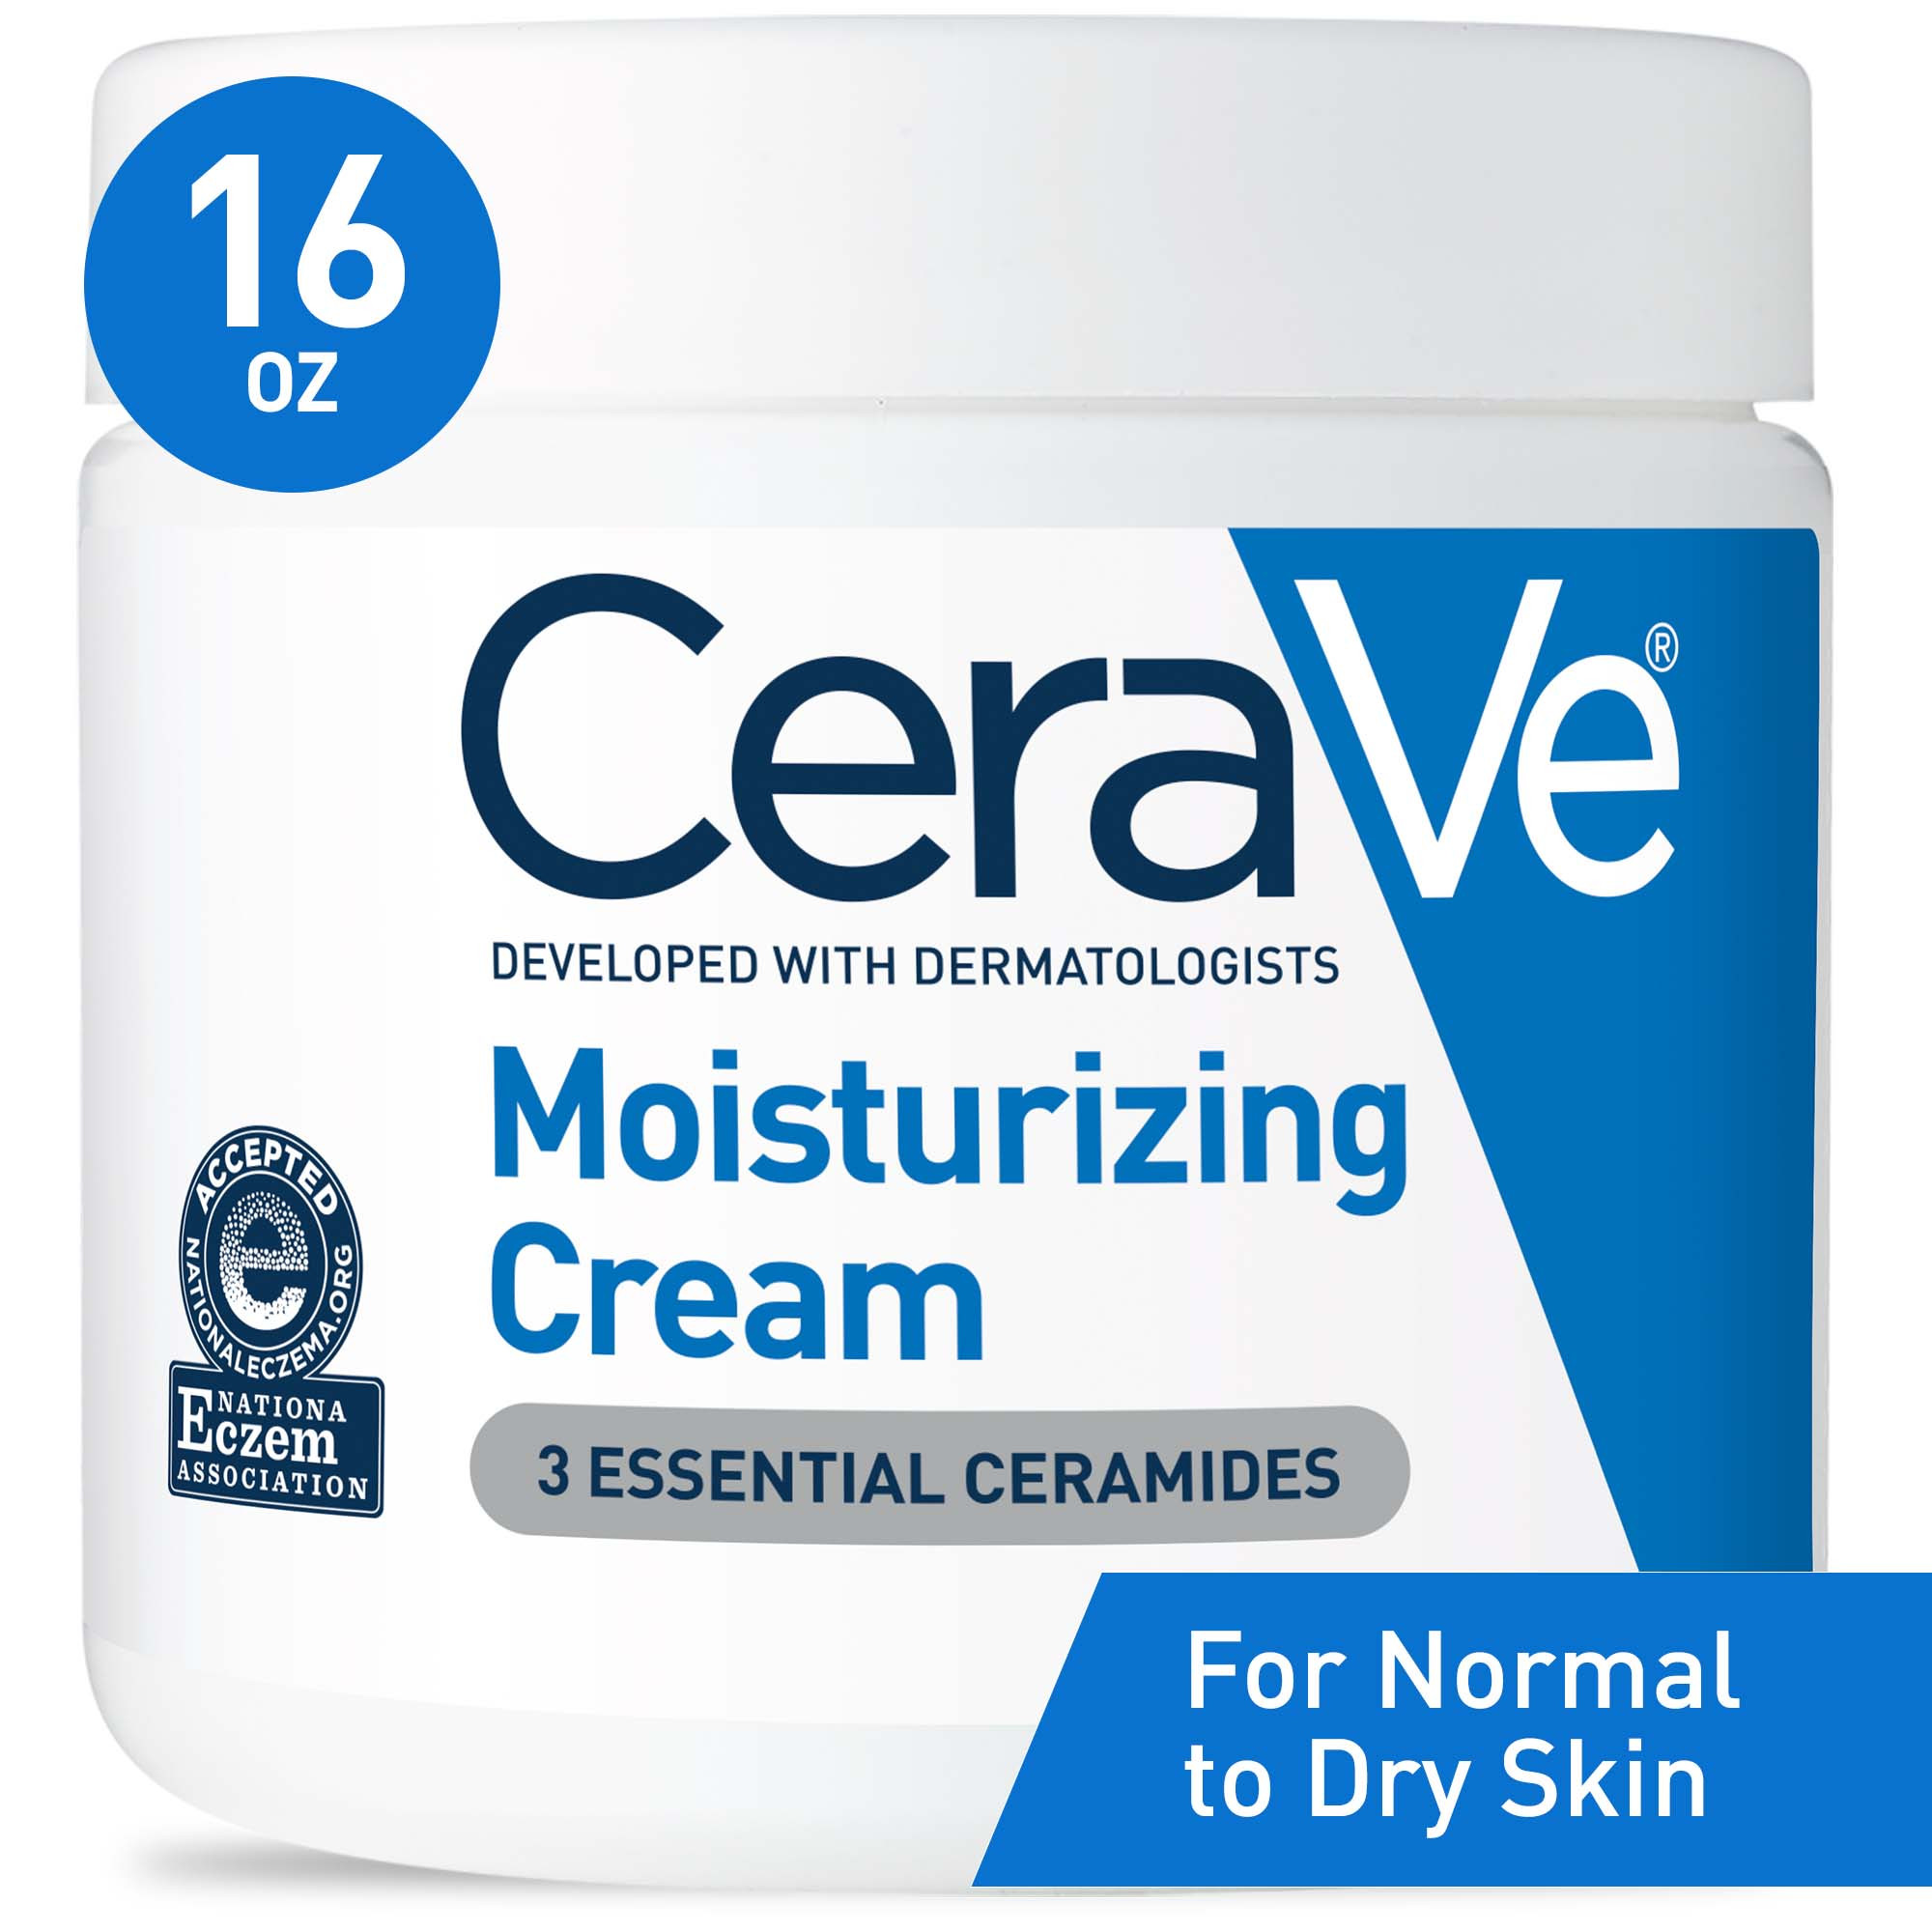 CeraVe Moisturizing Cream, Face Moisturizer & Body Lotion for Normal to Very Dry Skin, 16 oz - image 1 of 14